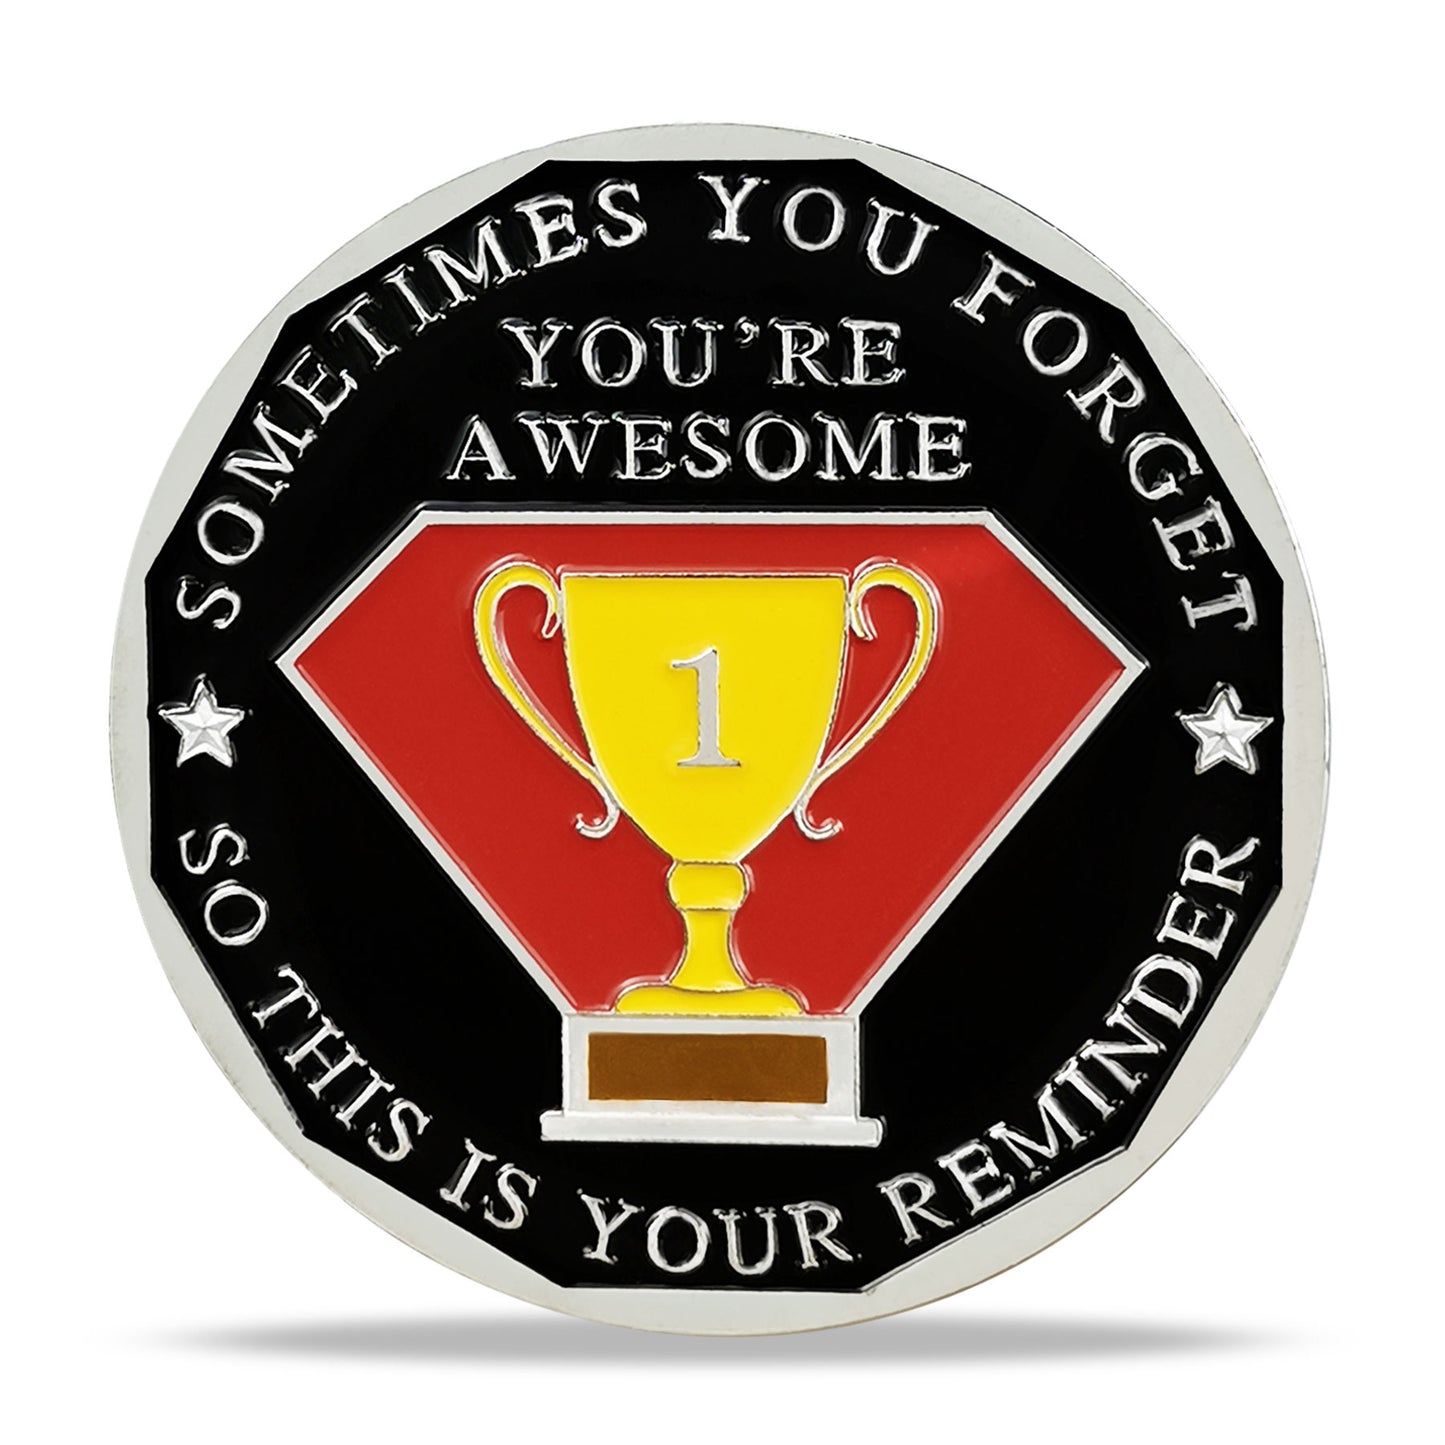 Encouragement Challenge Coin-employee Appreciation Gifts Inspirational Thank You Coin for Students and Cowokers-Break Through Difficulties